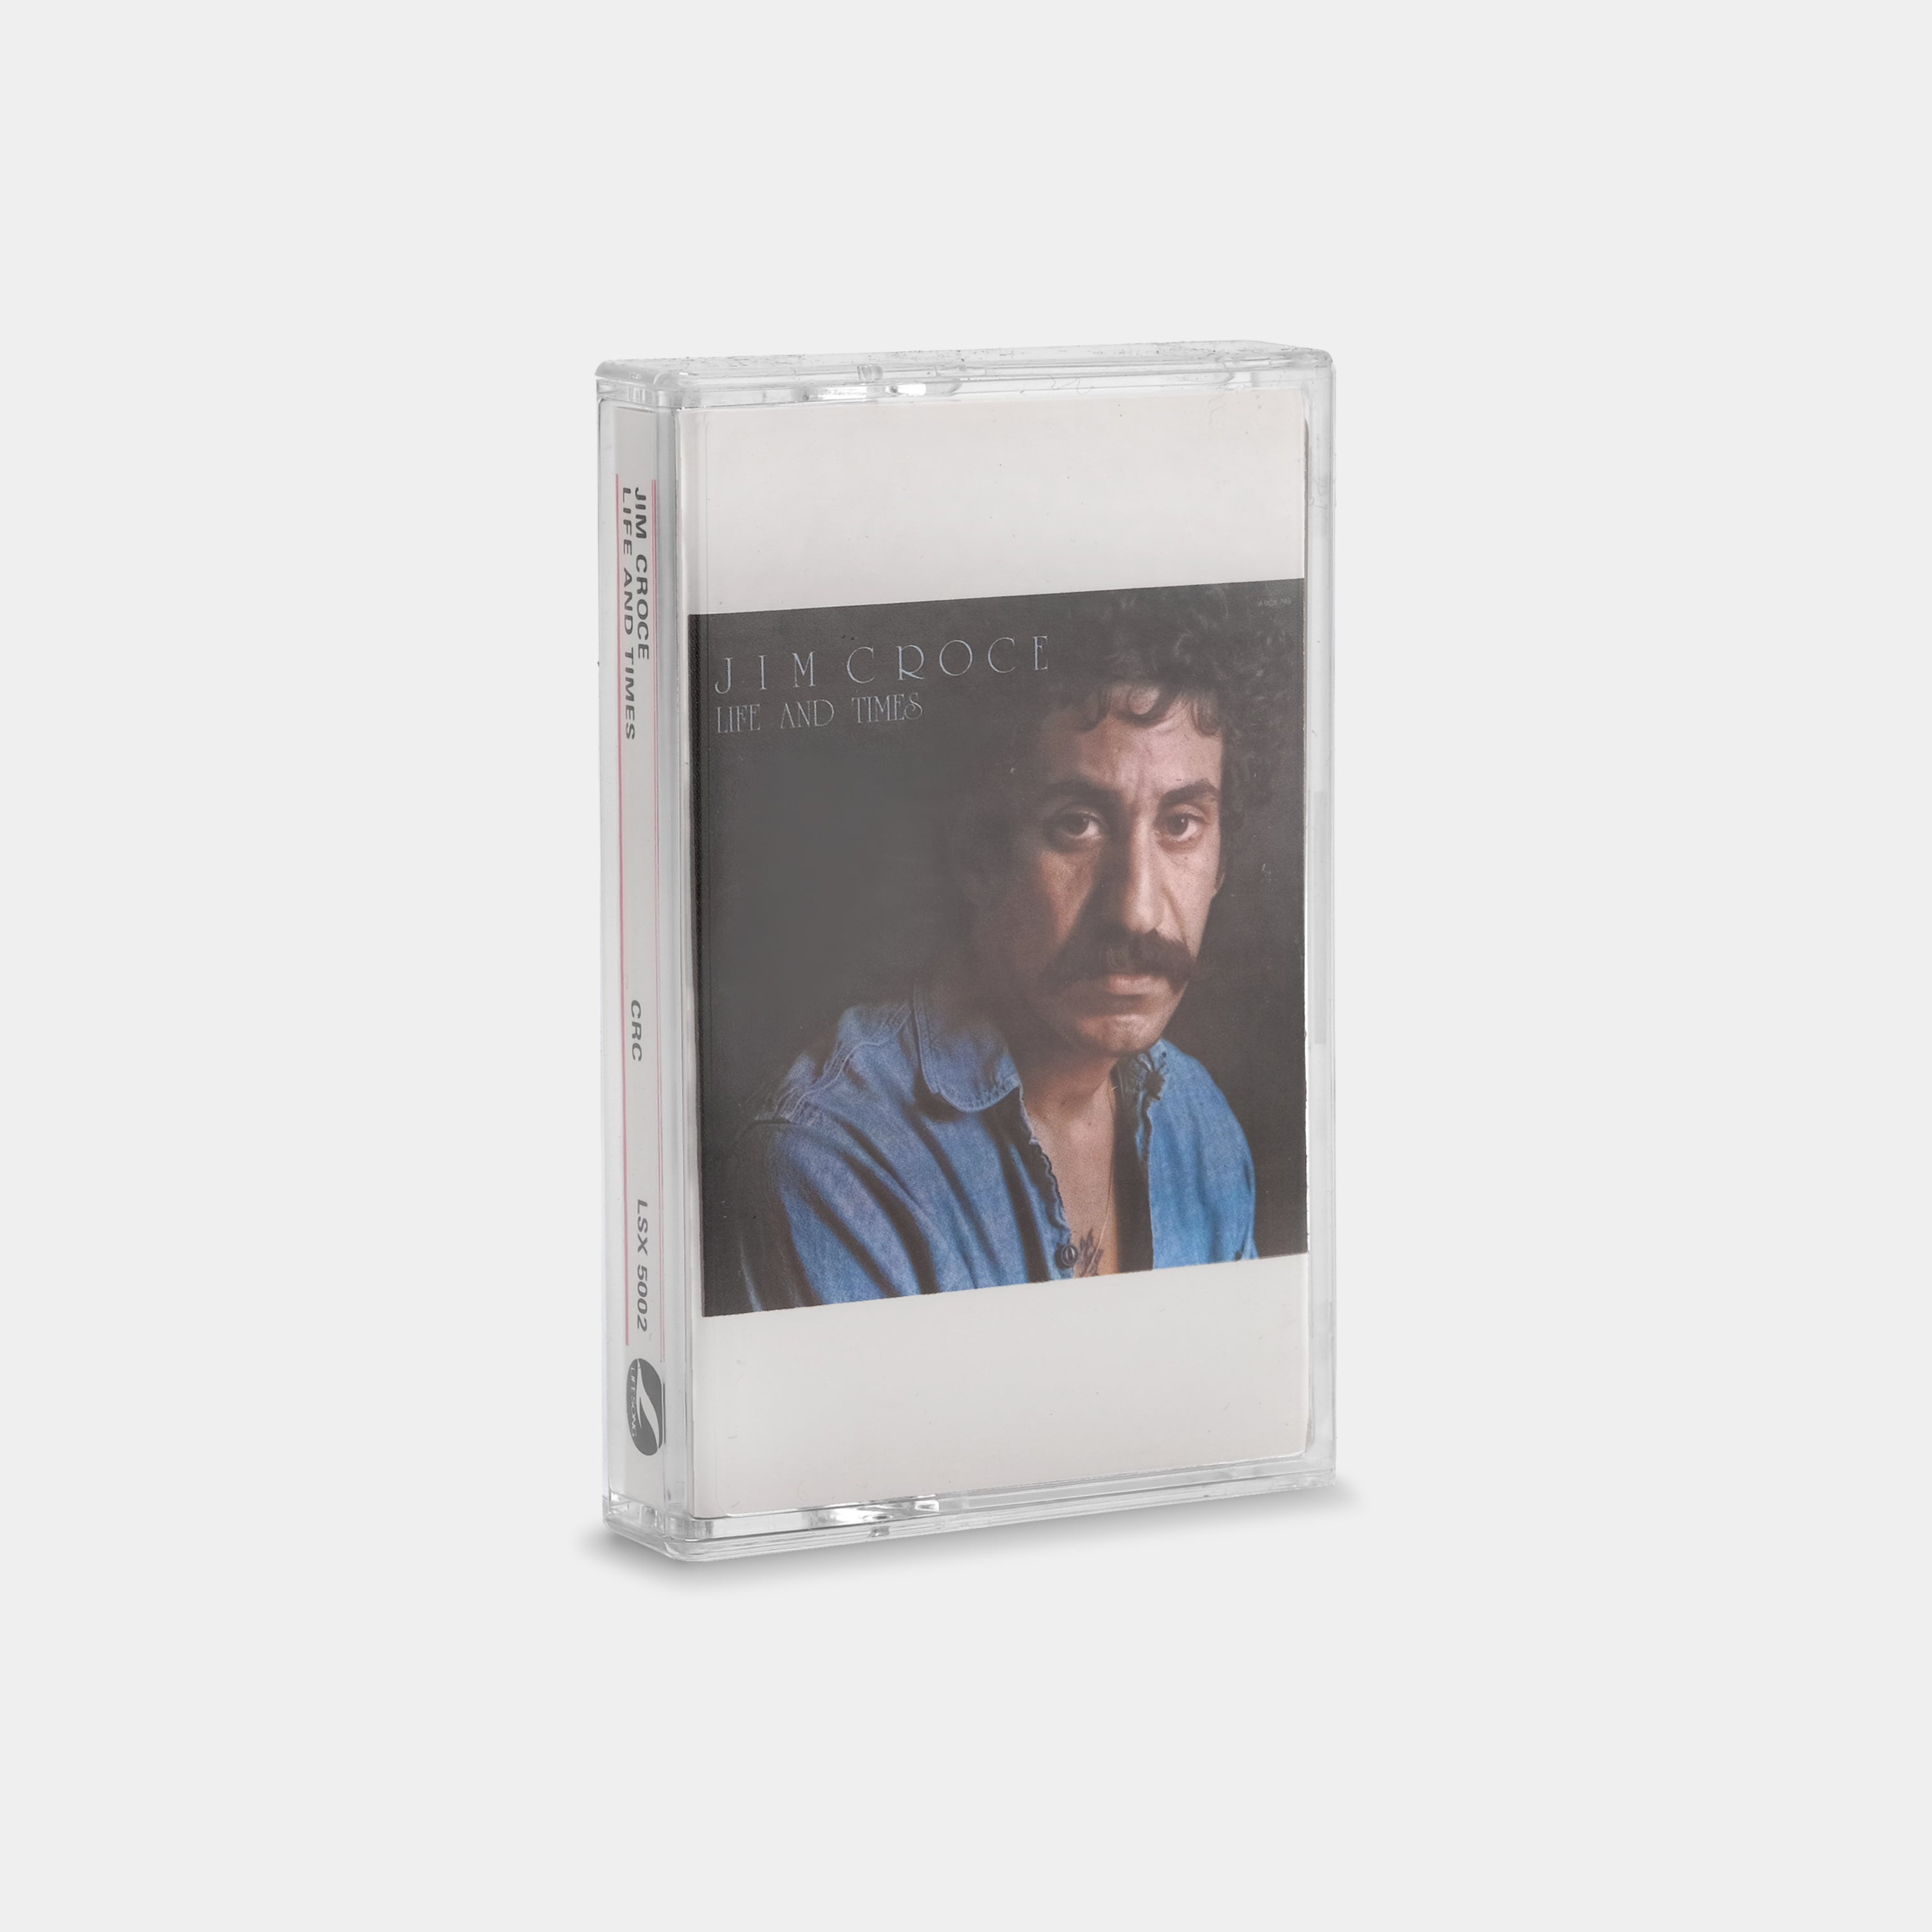 Jim Croce - Life and Times Cassette Tape